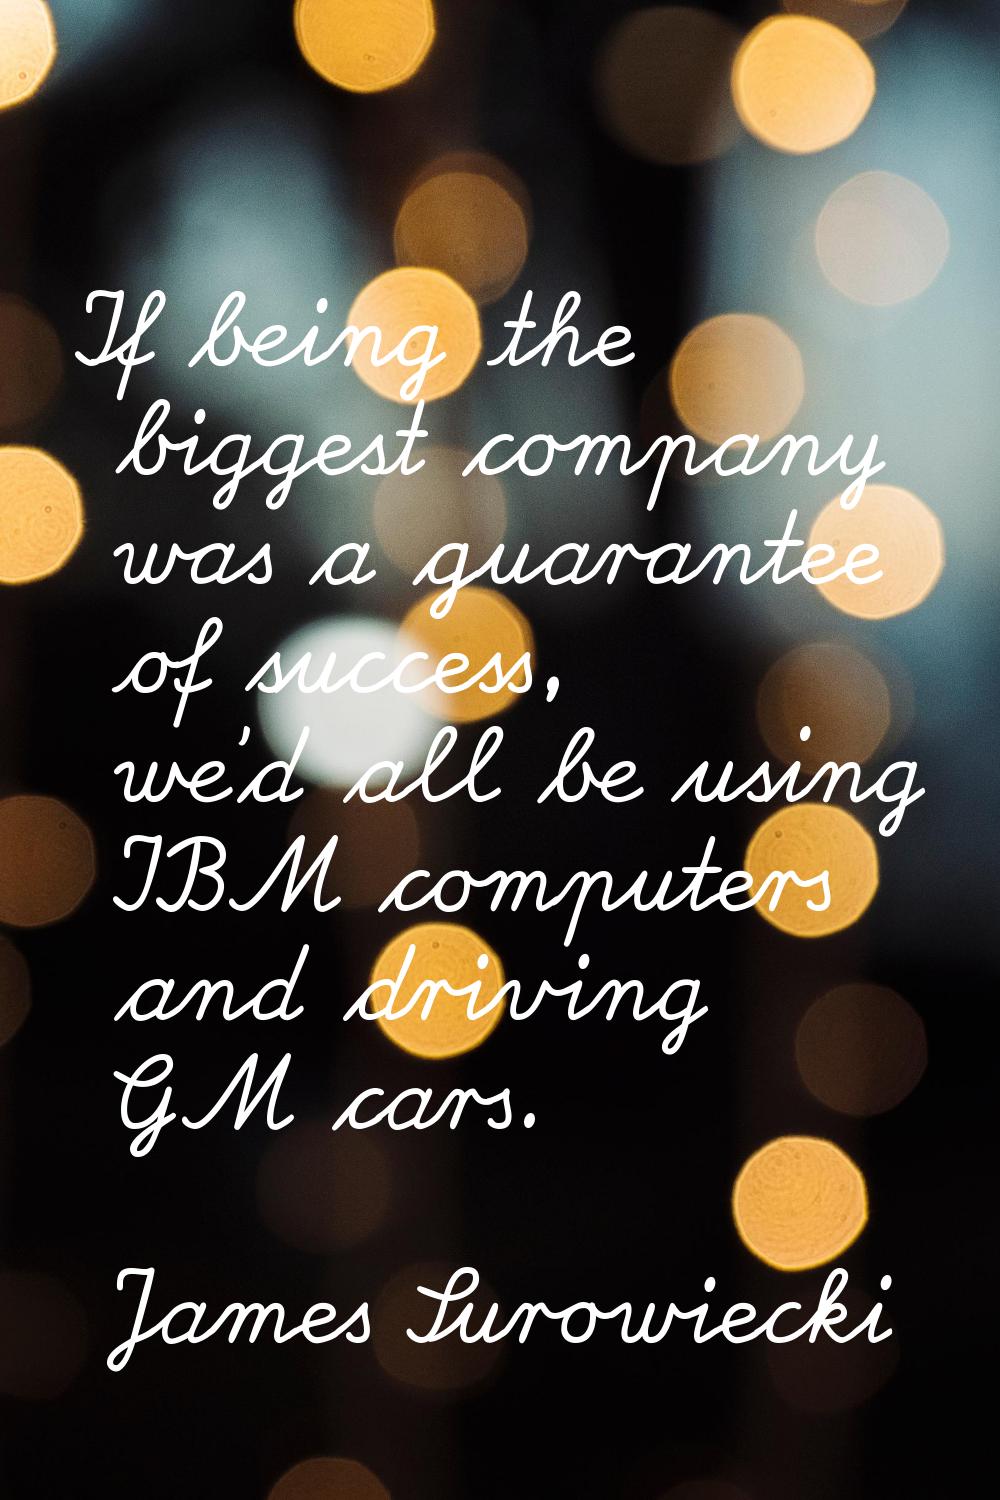 If being the biggest company was a guarantee of success, we'd all be using IBM computers and drivin